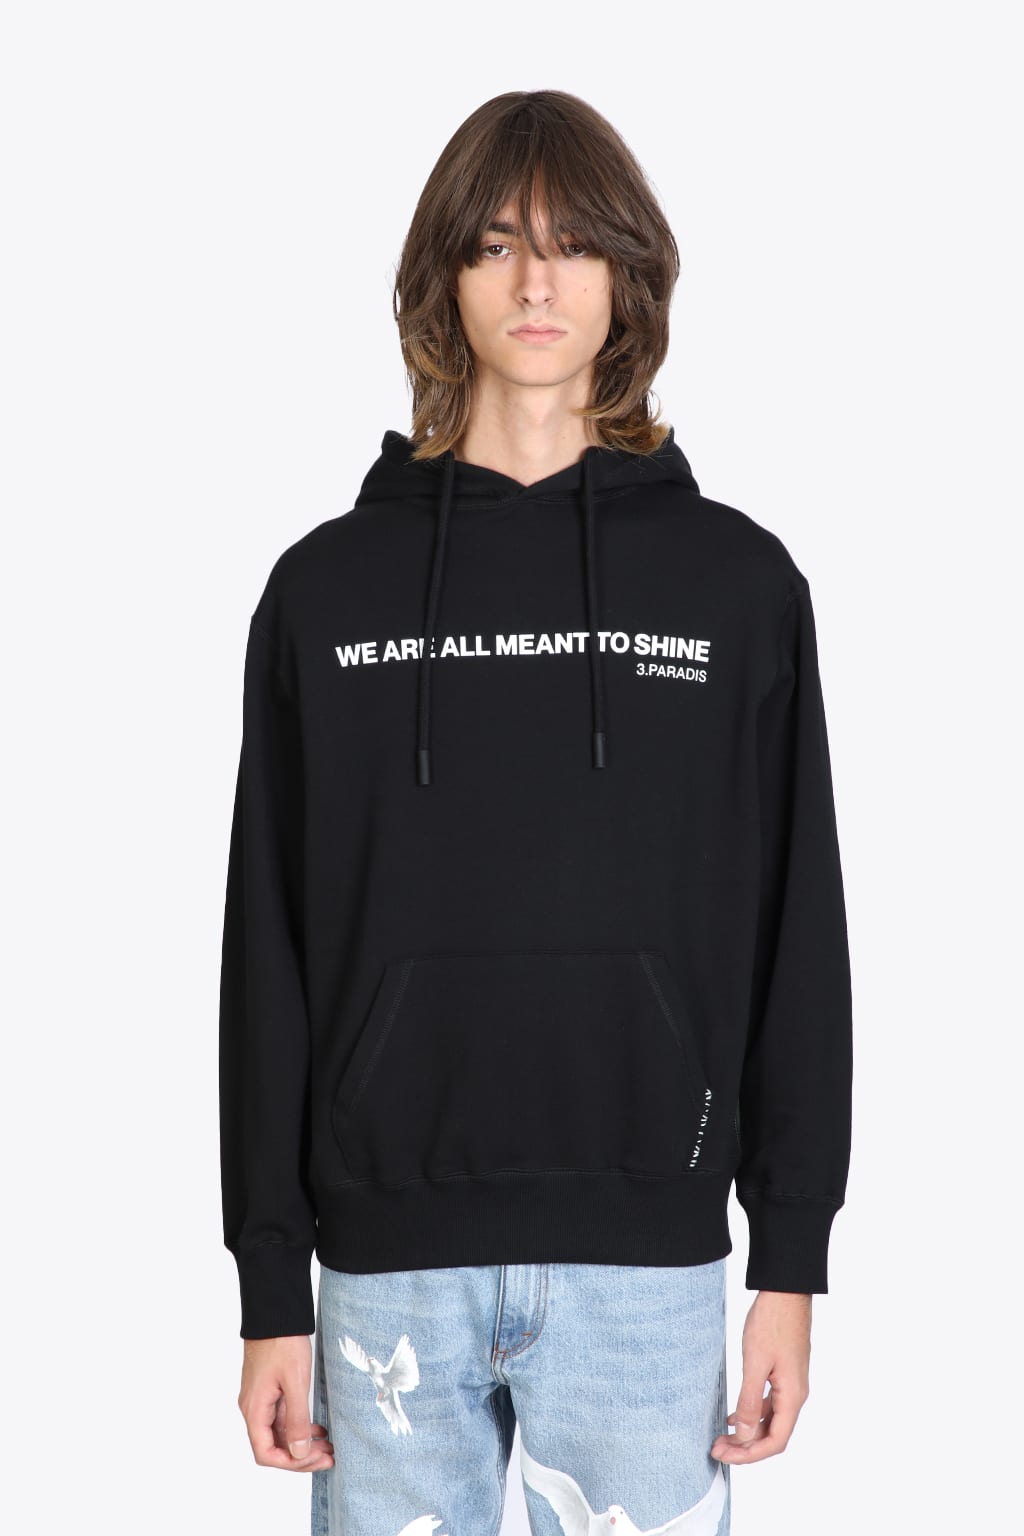 3.Paradis Child Hooded Sweater Black hoodie with front slogan and back graphic print - Child hooded sweater